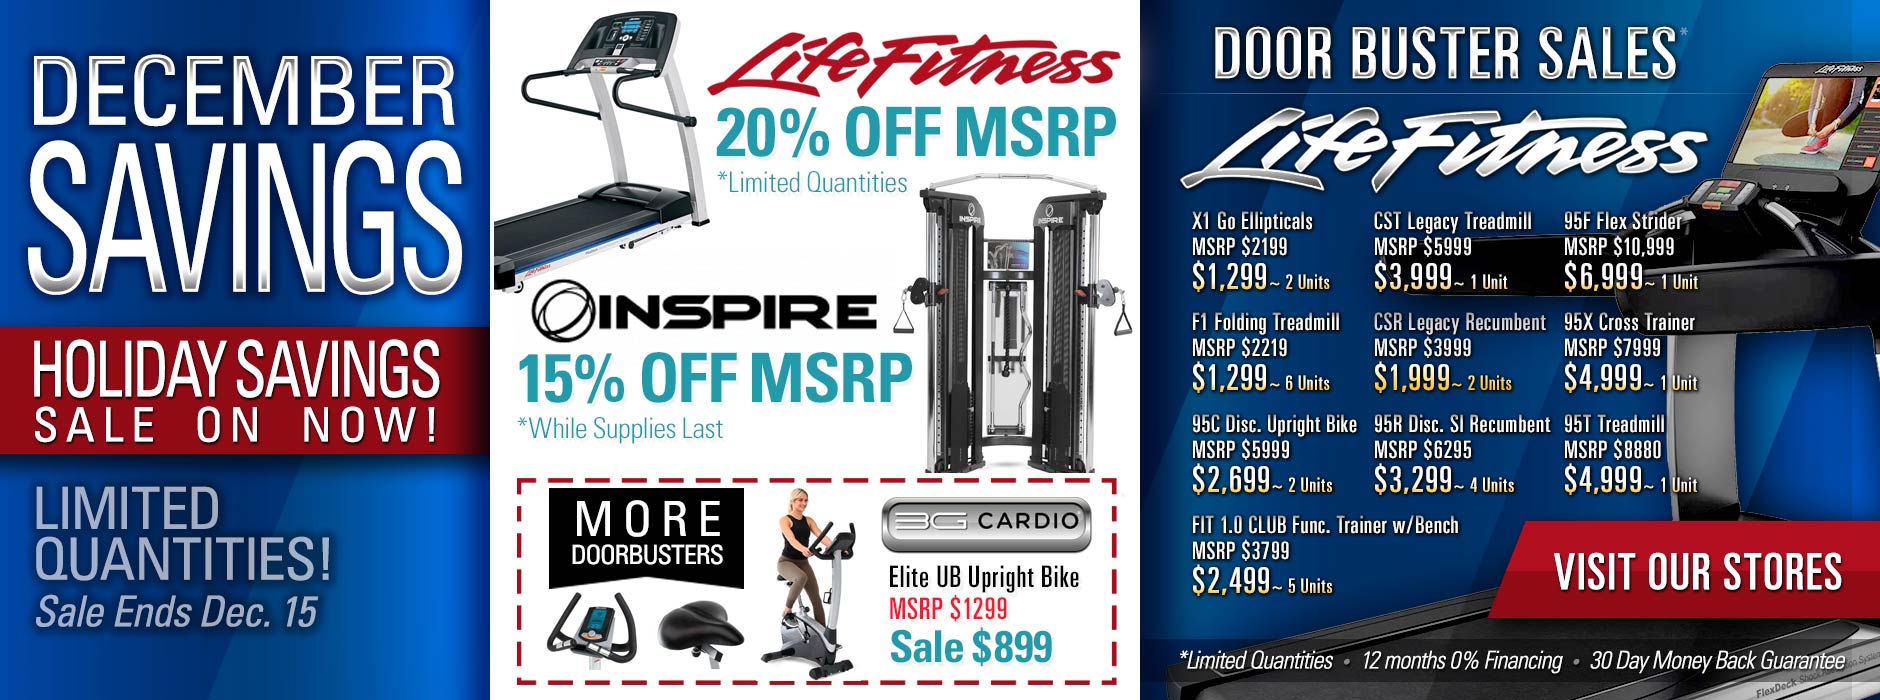 At Home Fitness December Holiday Sale 2019 on now